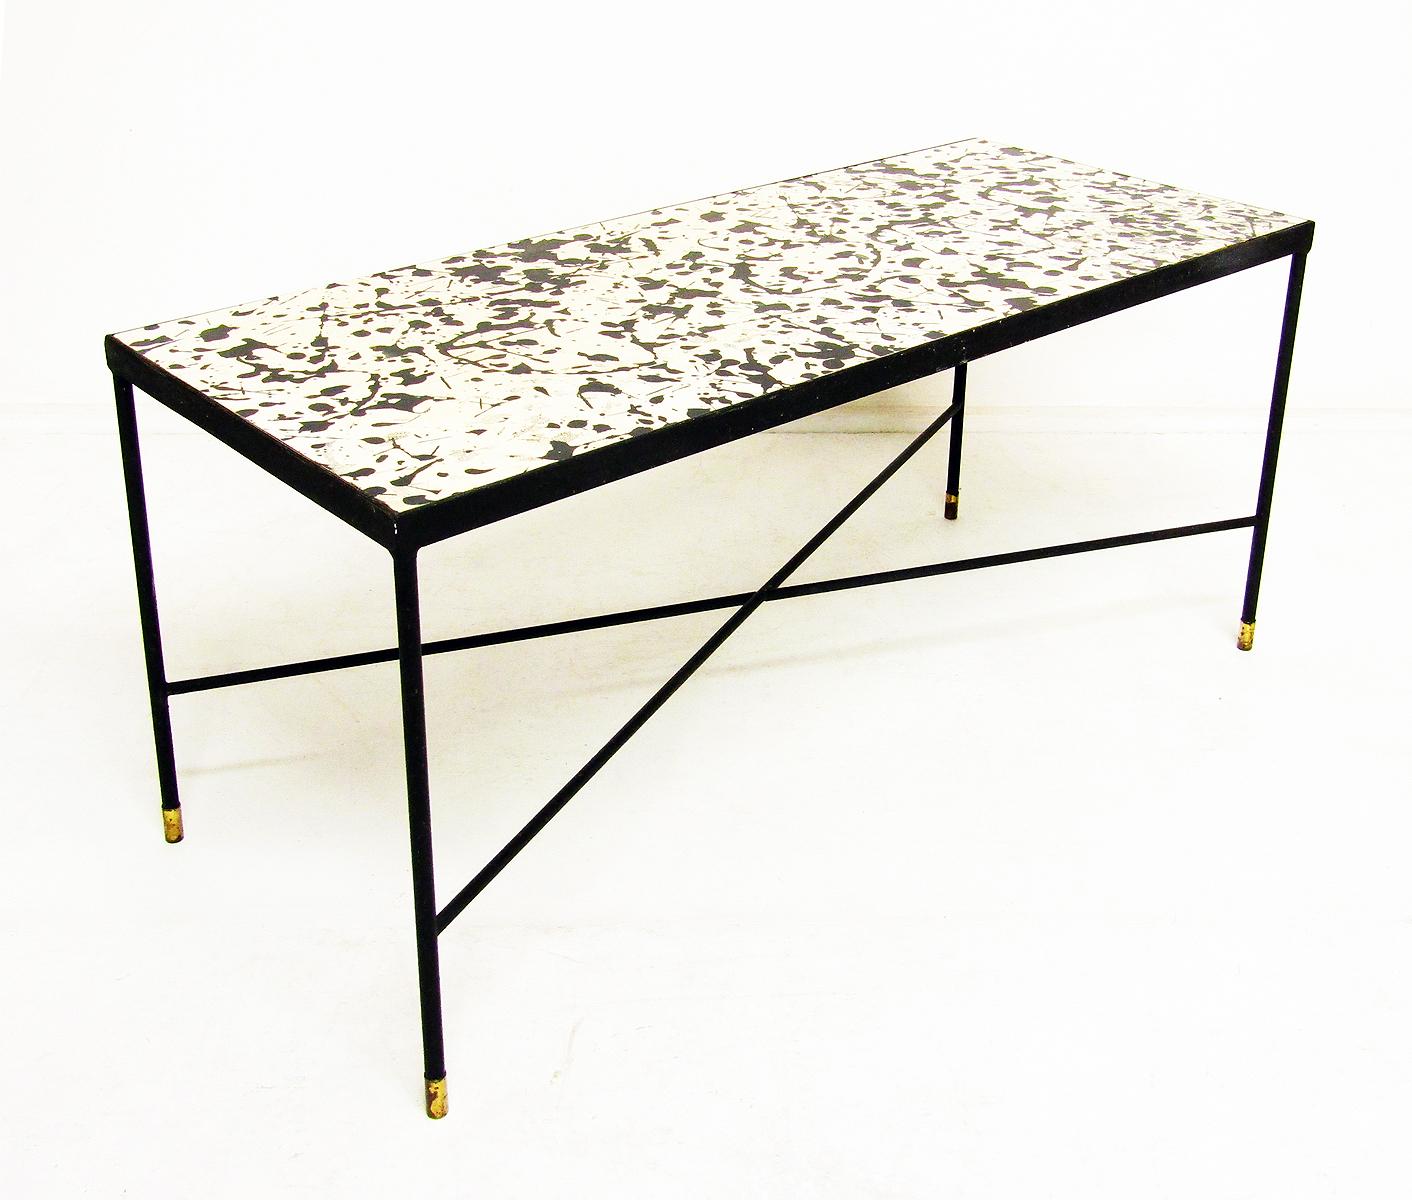 A vintage 1960s geometric designer coffee table in iron and formica with brass feet.

Reminiscent of Jackson Pollock's drip paintings, the formica surface is in good vintage condition.

It was very probably retailed by Heals in the 1960s.